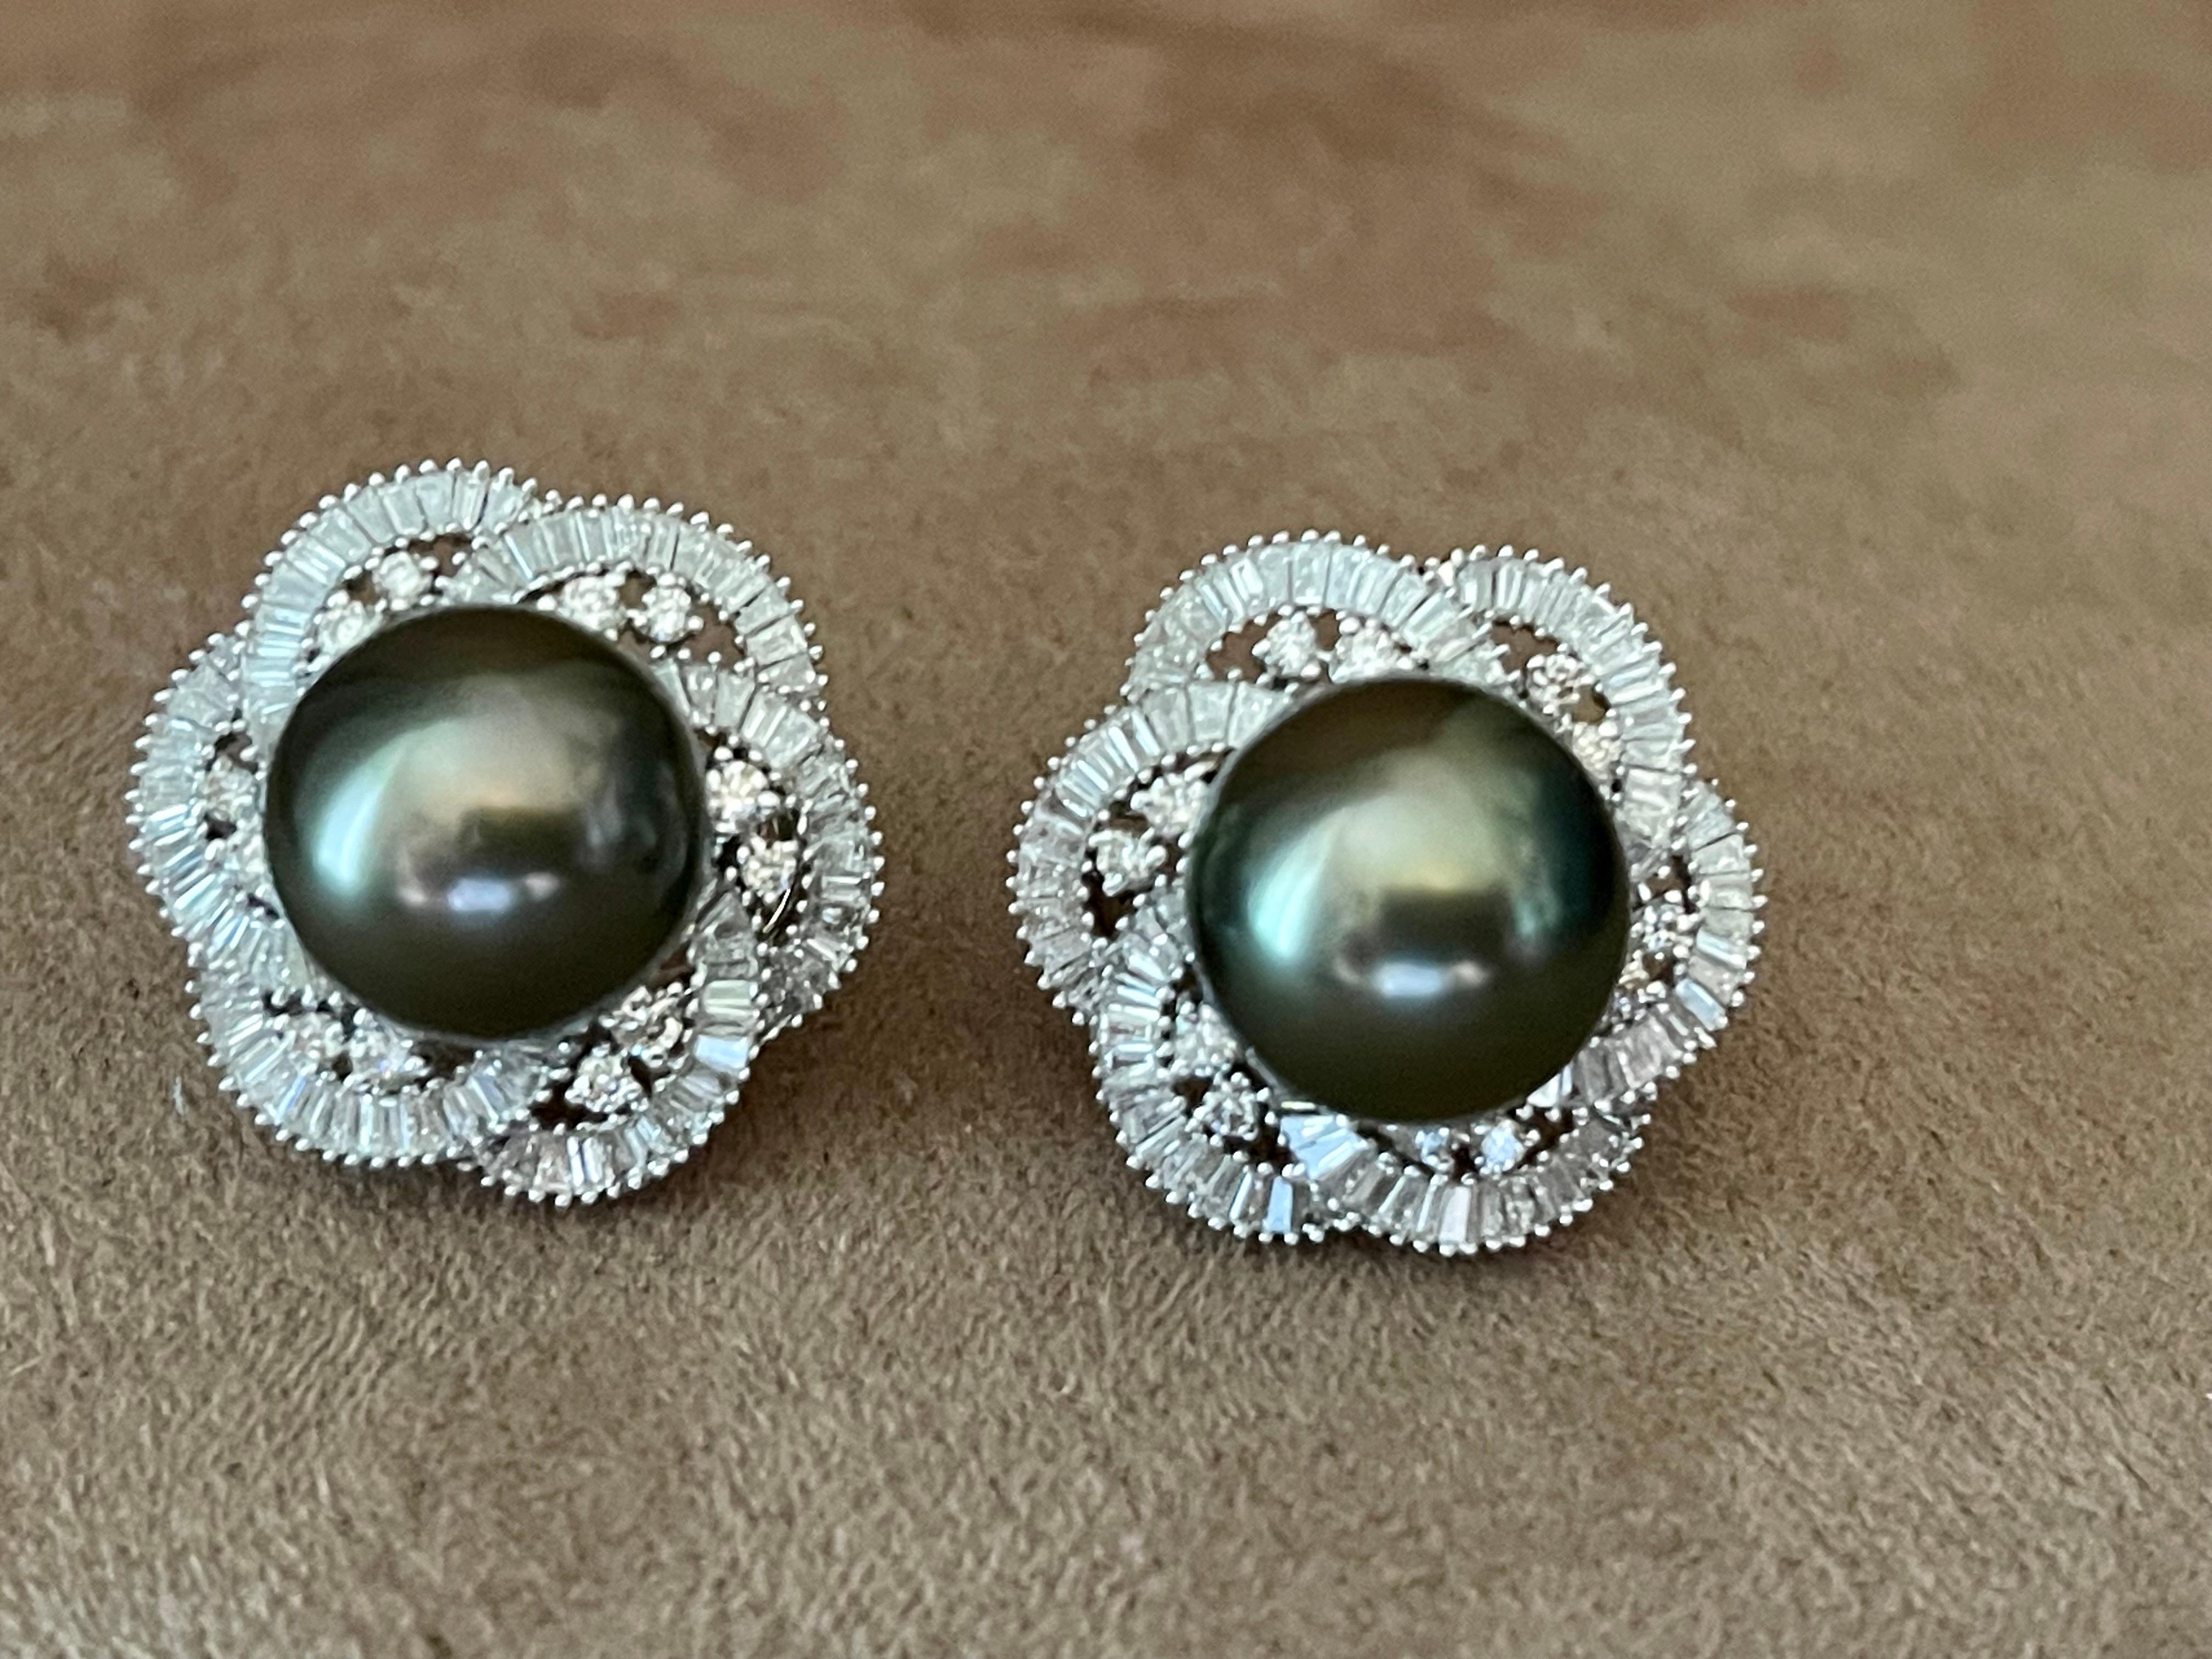 A pair of timeless 18 K white Gold earrings featuring 2 Tahitian pearls measuring ca. 12mm surroundes with a halo design that consists of 24 brilliant cut Diamonds weighing 0.55 ct and 167 tapered Baguette Diamonds weighing 1.25 ct. These stunningly